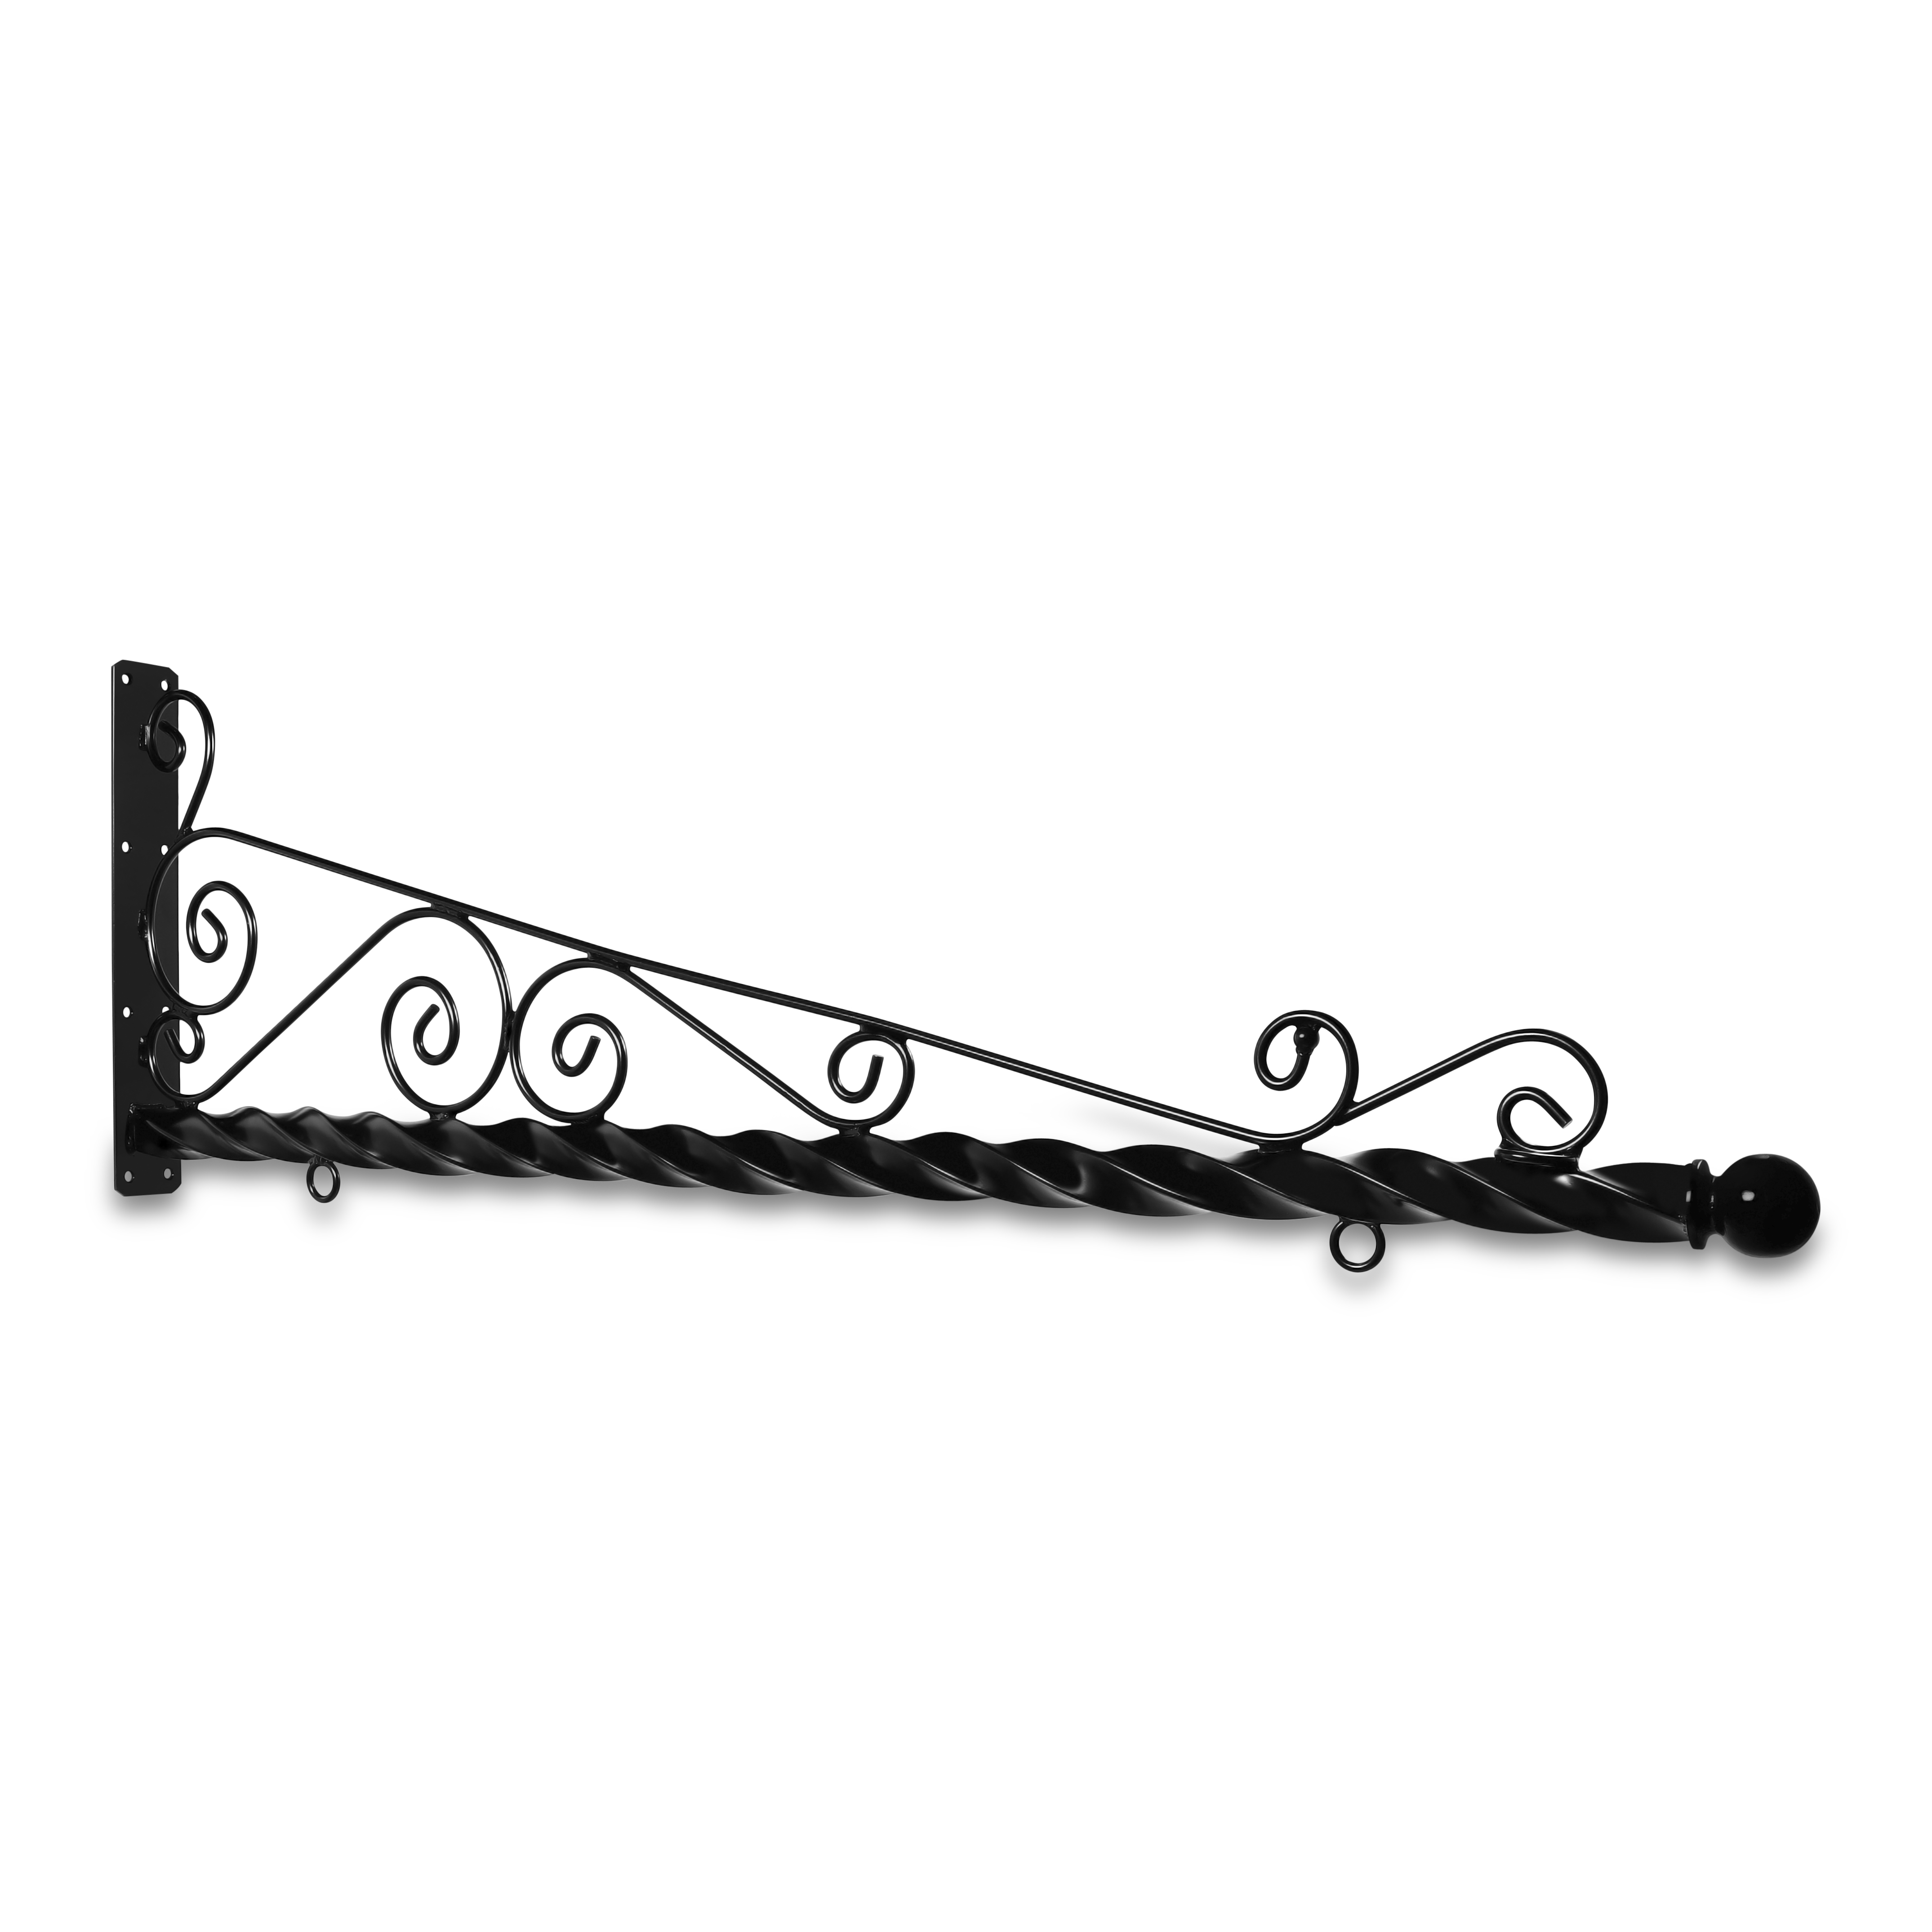 72'' Black Horizontal Super Deluxe Quin Spiral Steel Bracket with Ball Finial